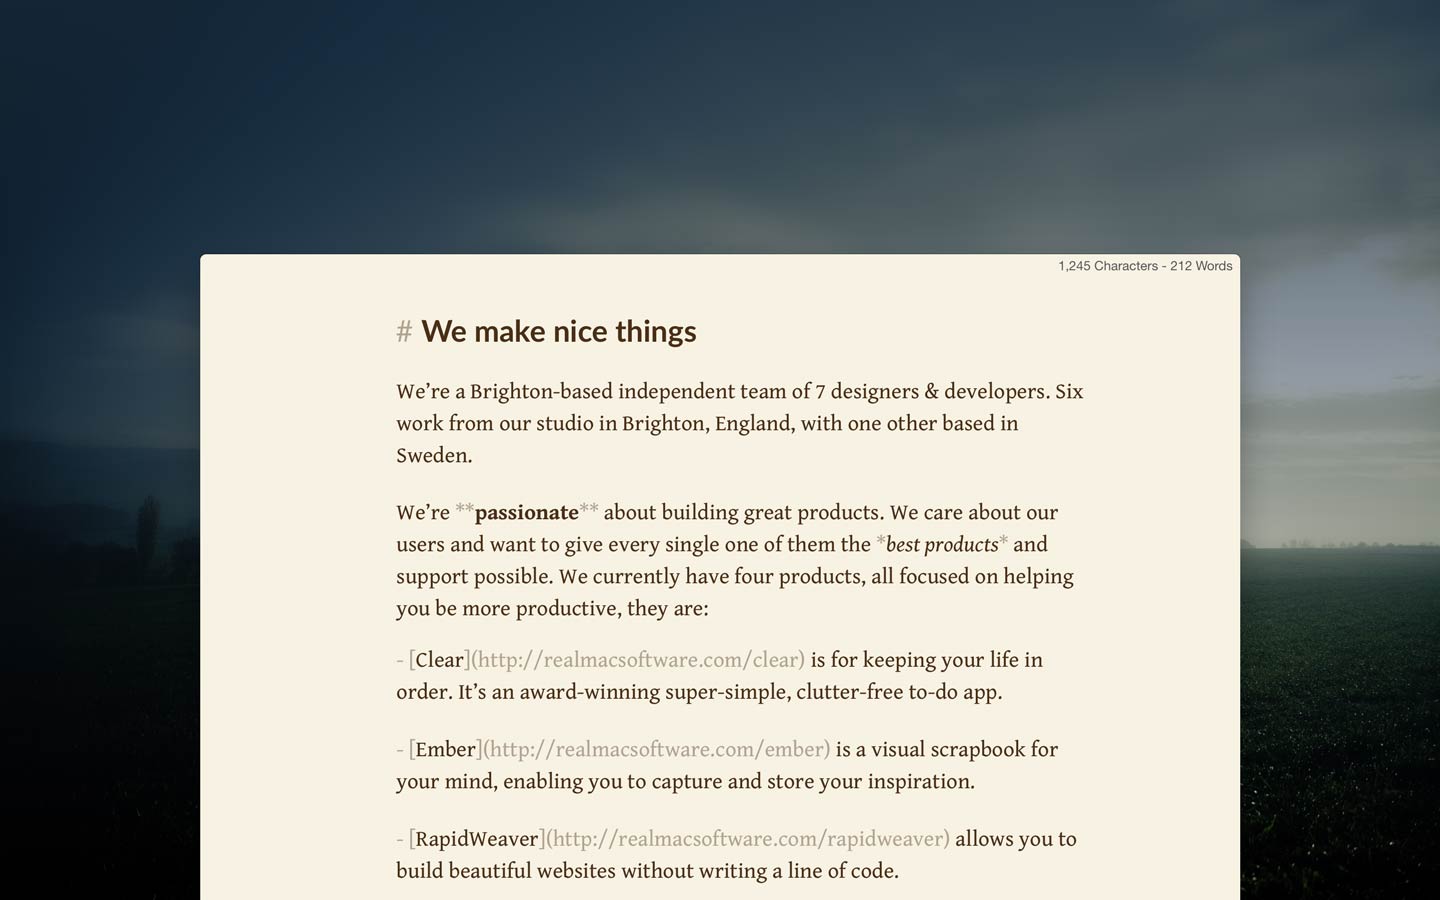 A distraction-free markdown editor that aids your focus